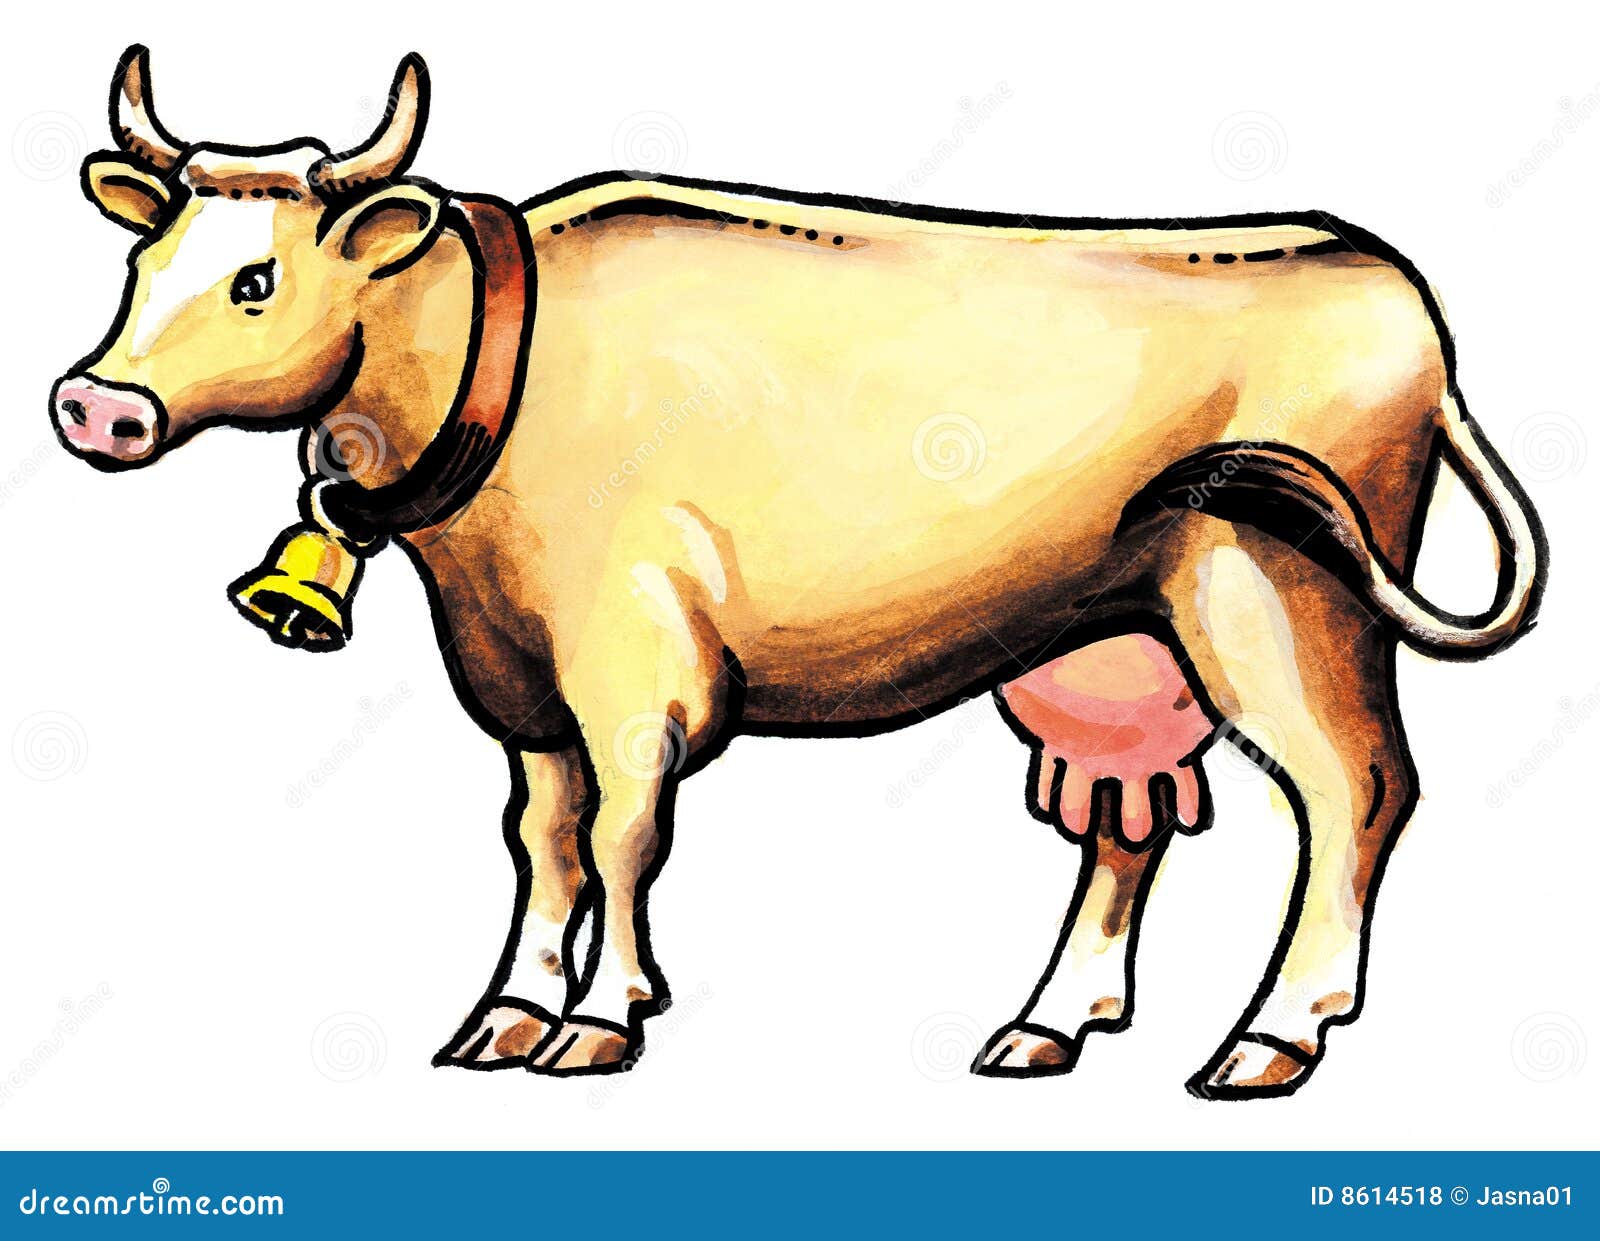 clipart brown cow - photo #25